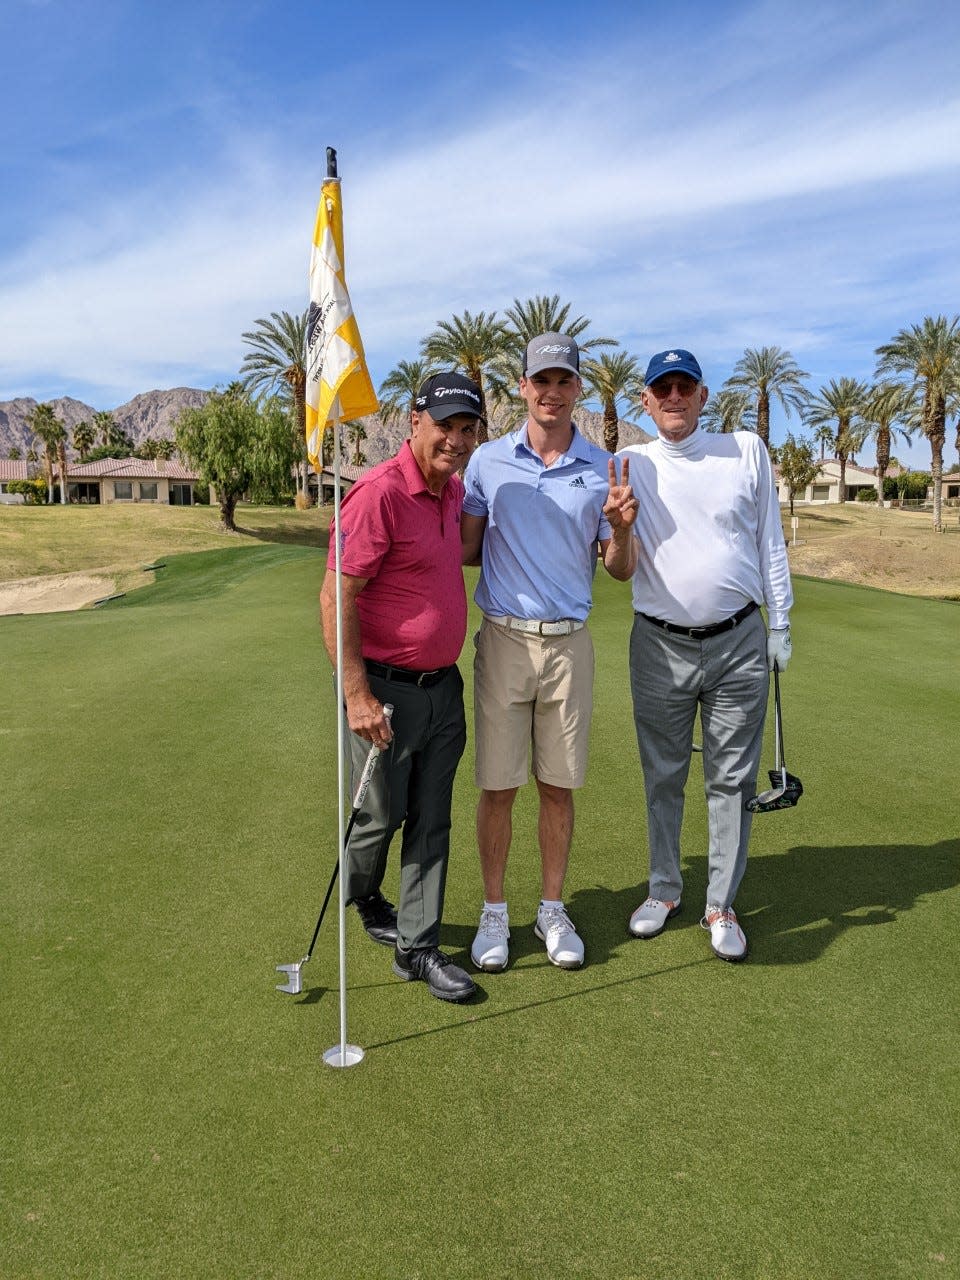 Danny Syring, center, celebrates his second double eagle of his round last Sunday with his father Kevin, left, and Jay Green of La Quinta, right.